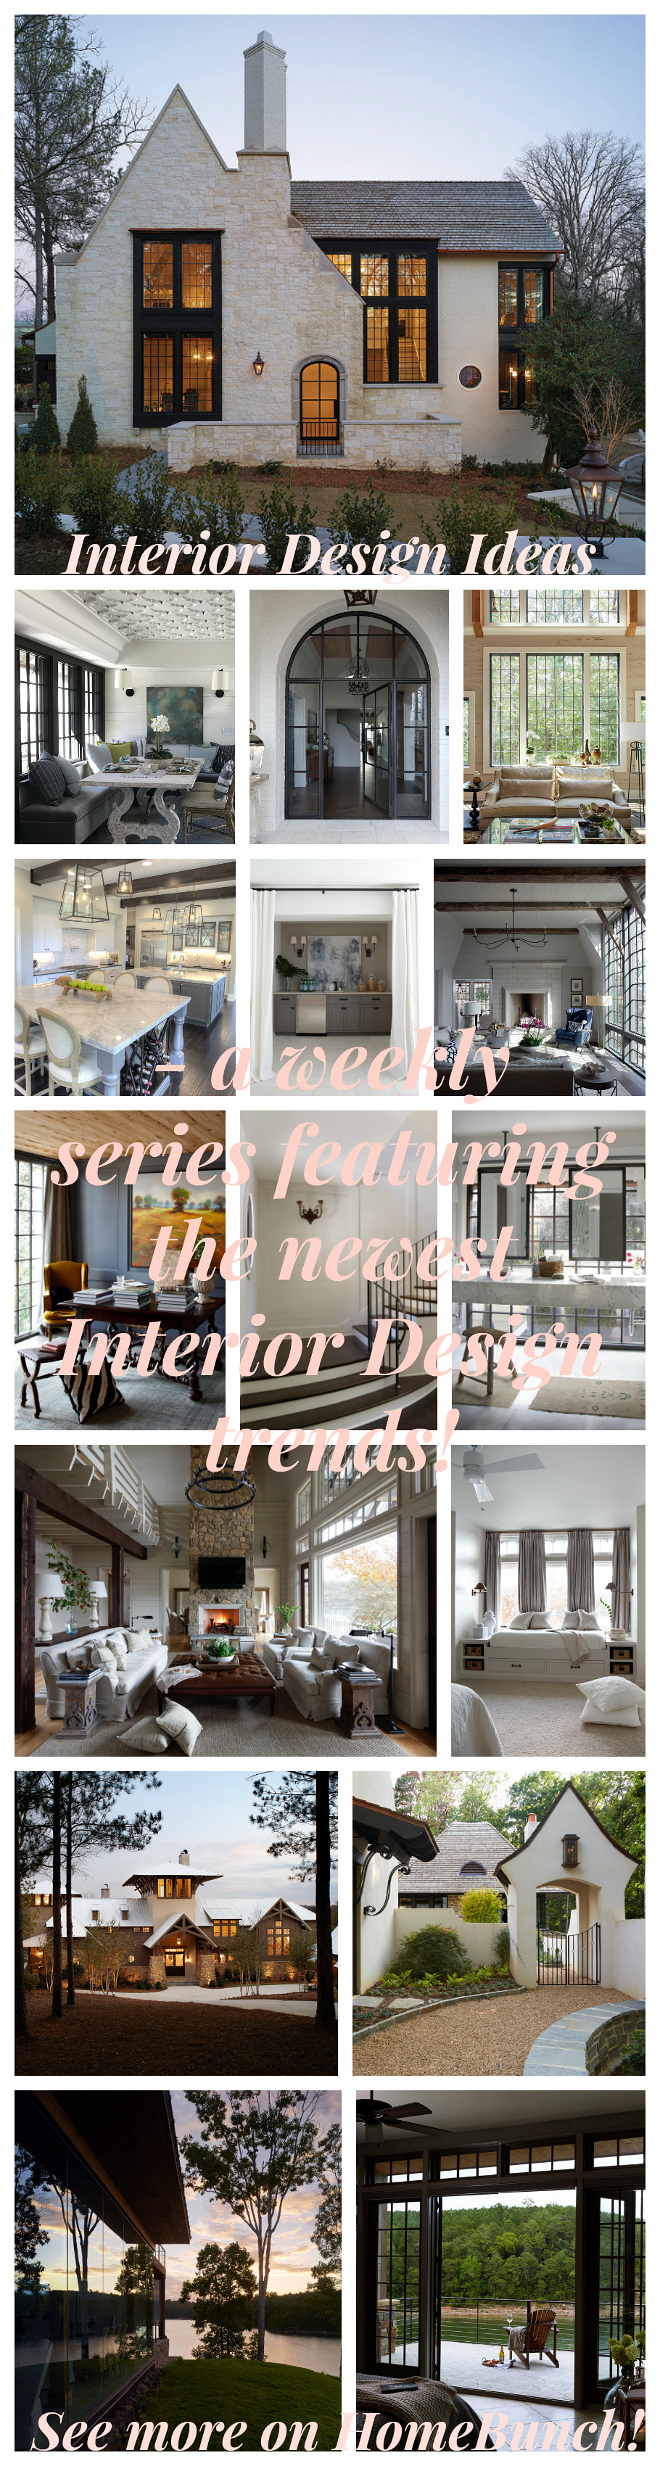 New Interior Design Ideas - a weekly series featuring the newest interior trends! See more on Home Bunch!